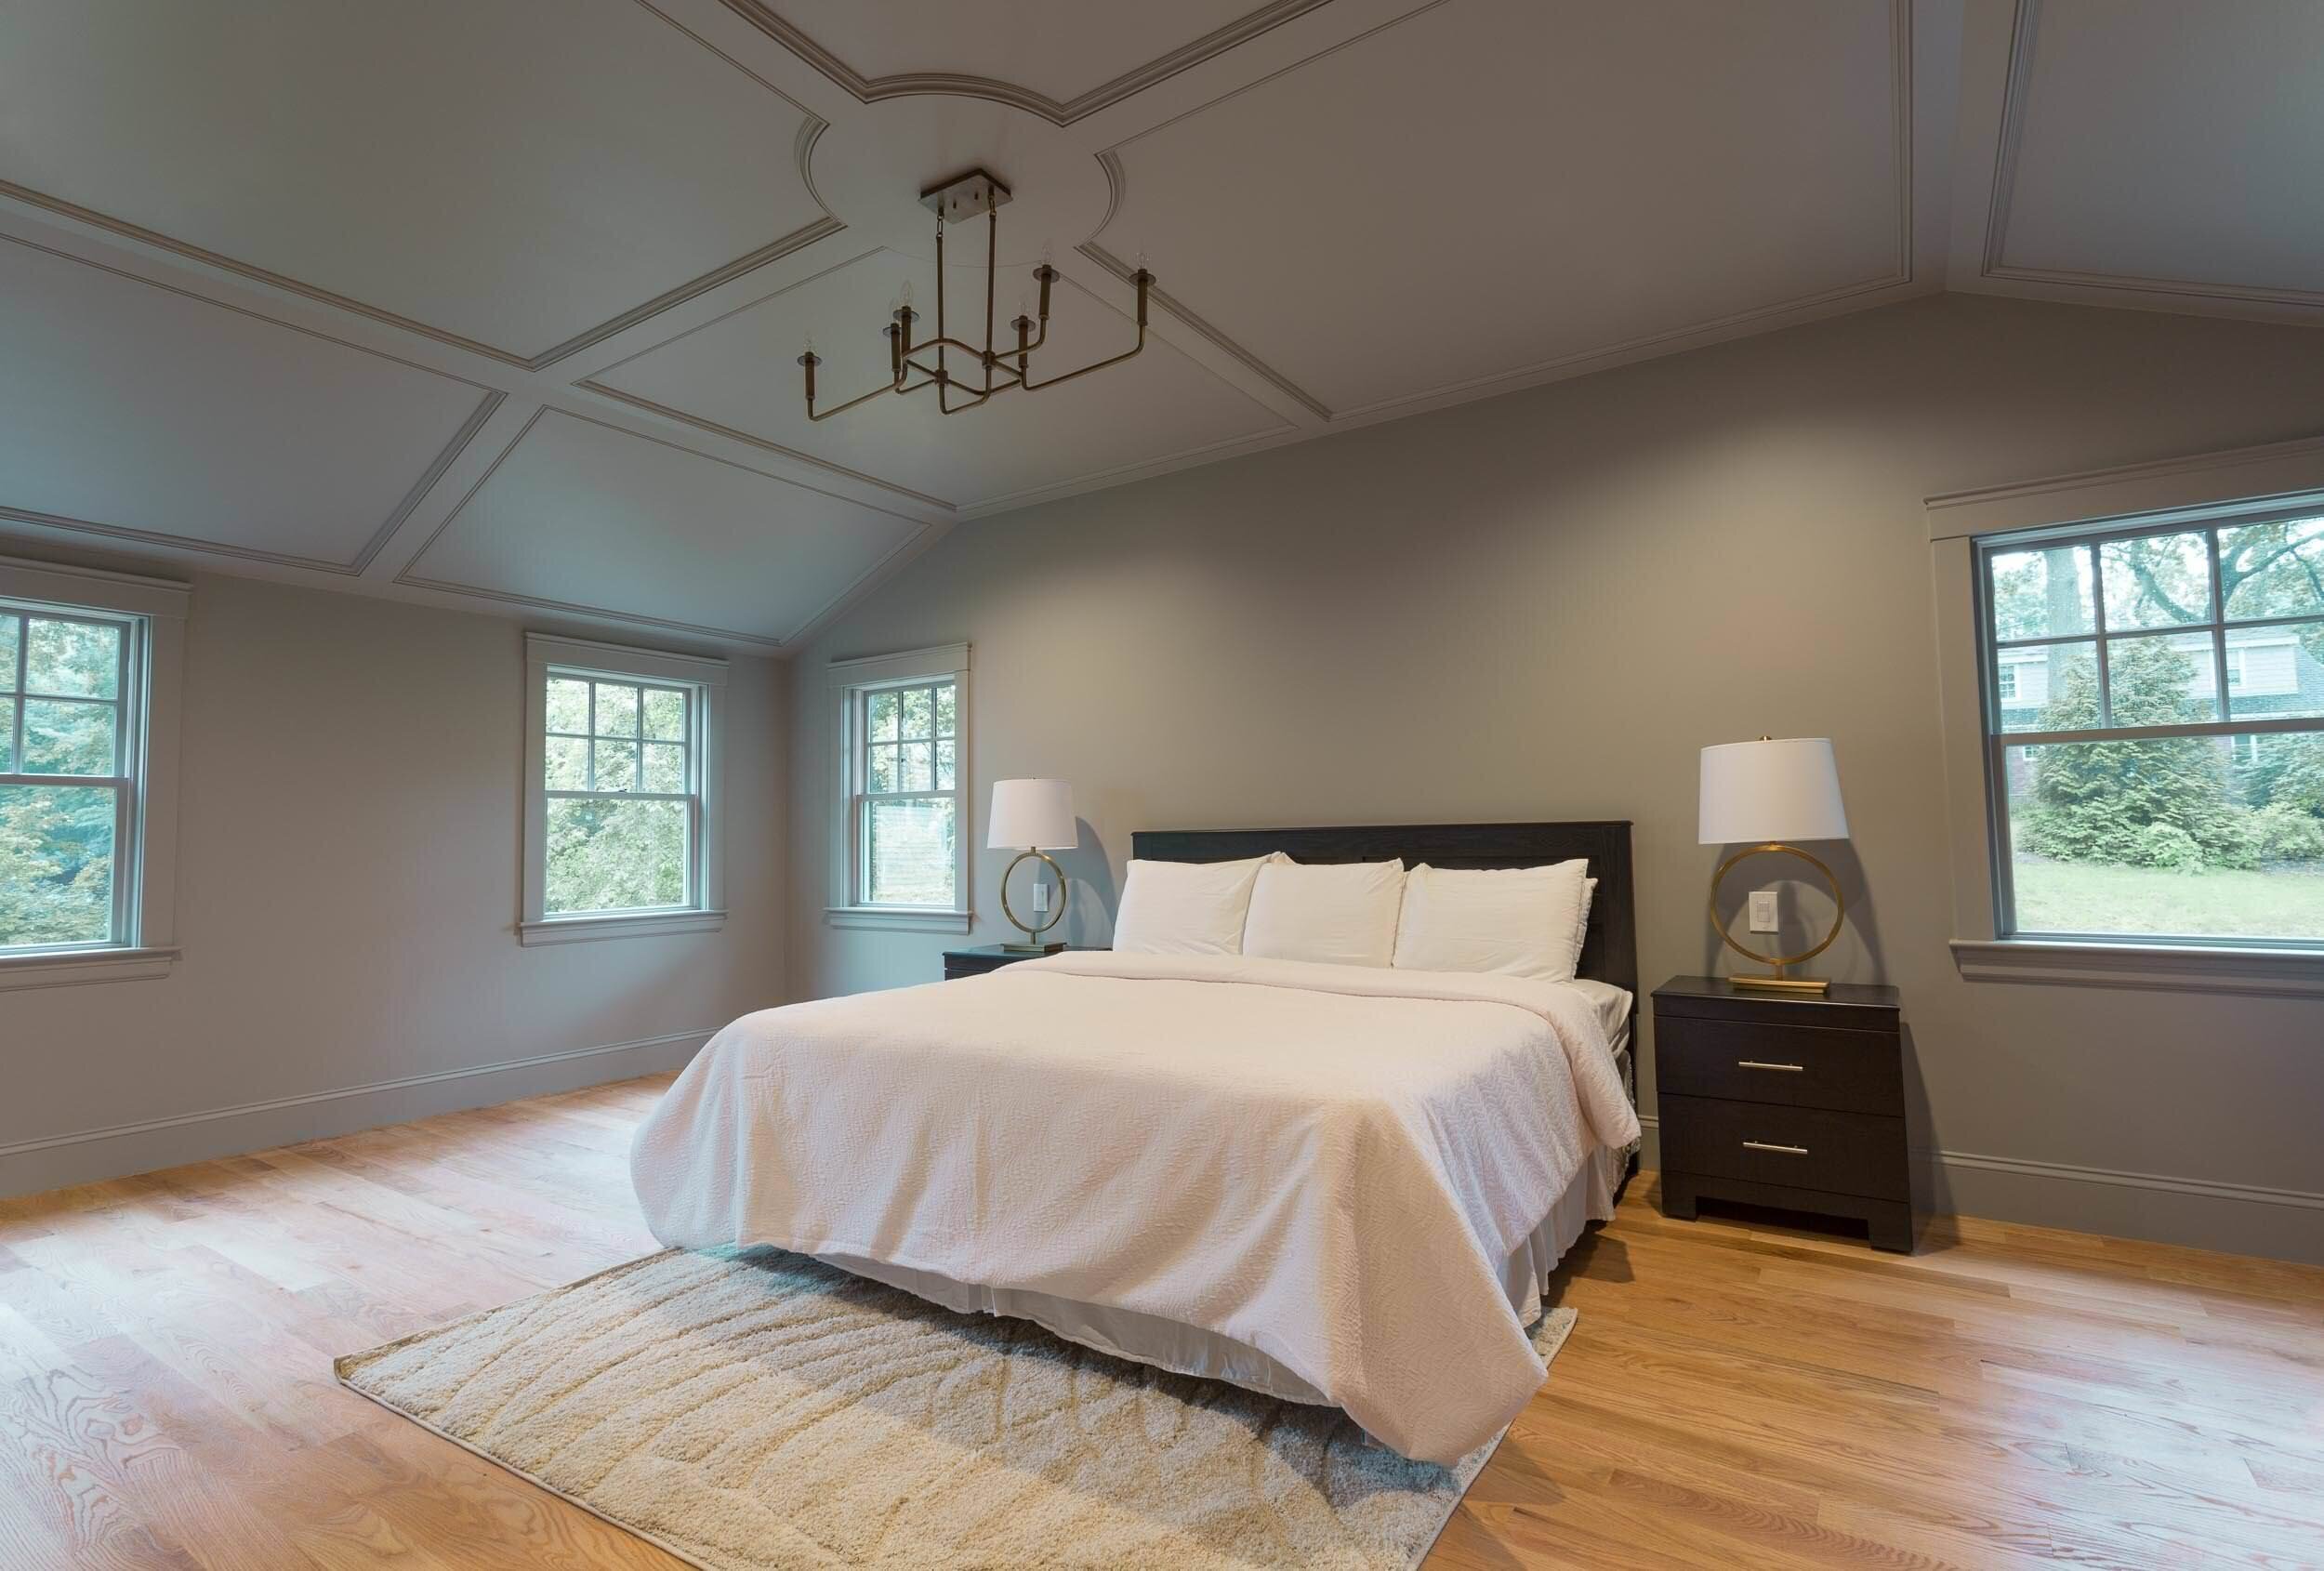 5 Ways To Paint Your Ceiling In 2020, Are White Ceilings Out Of Style